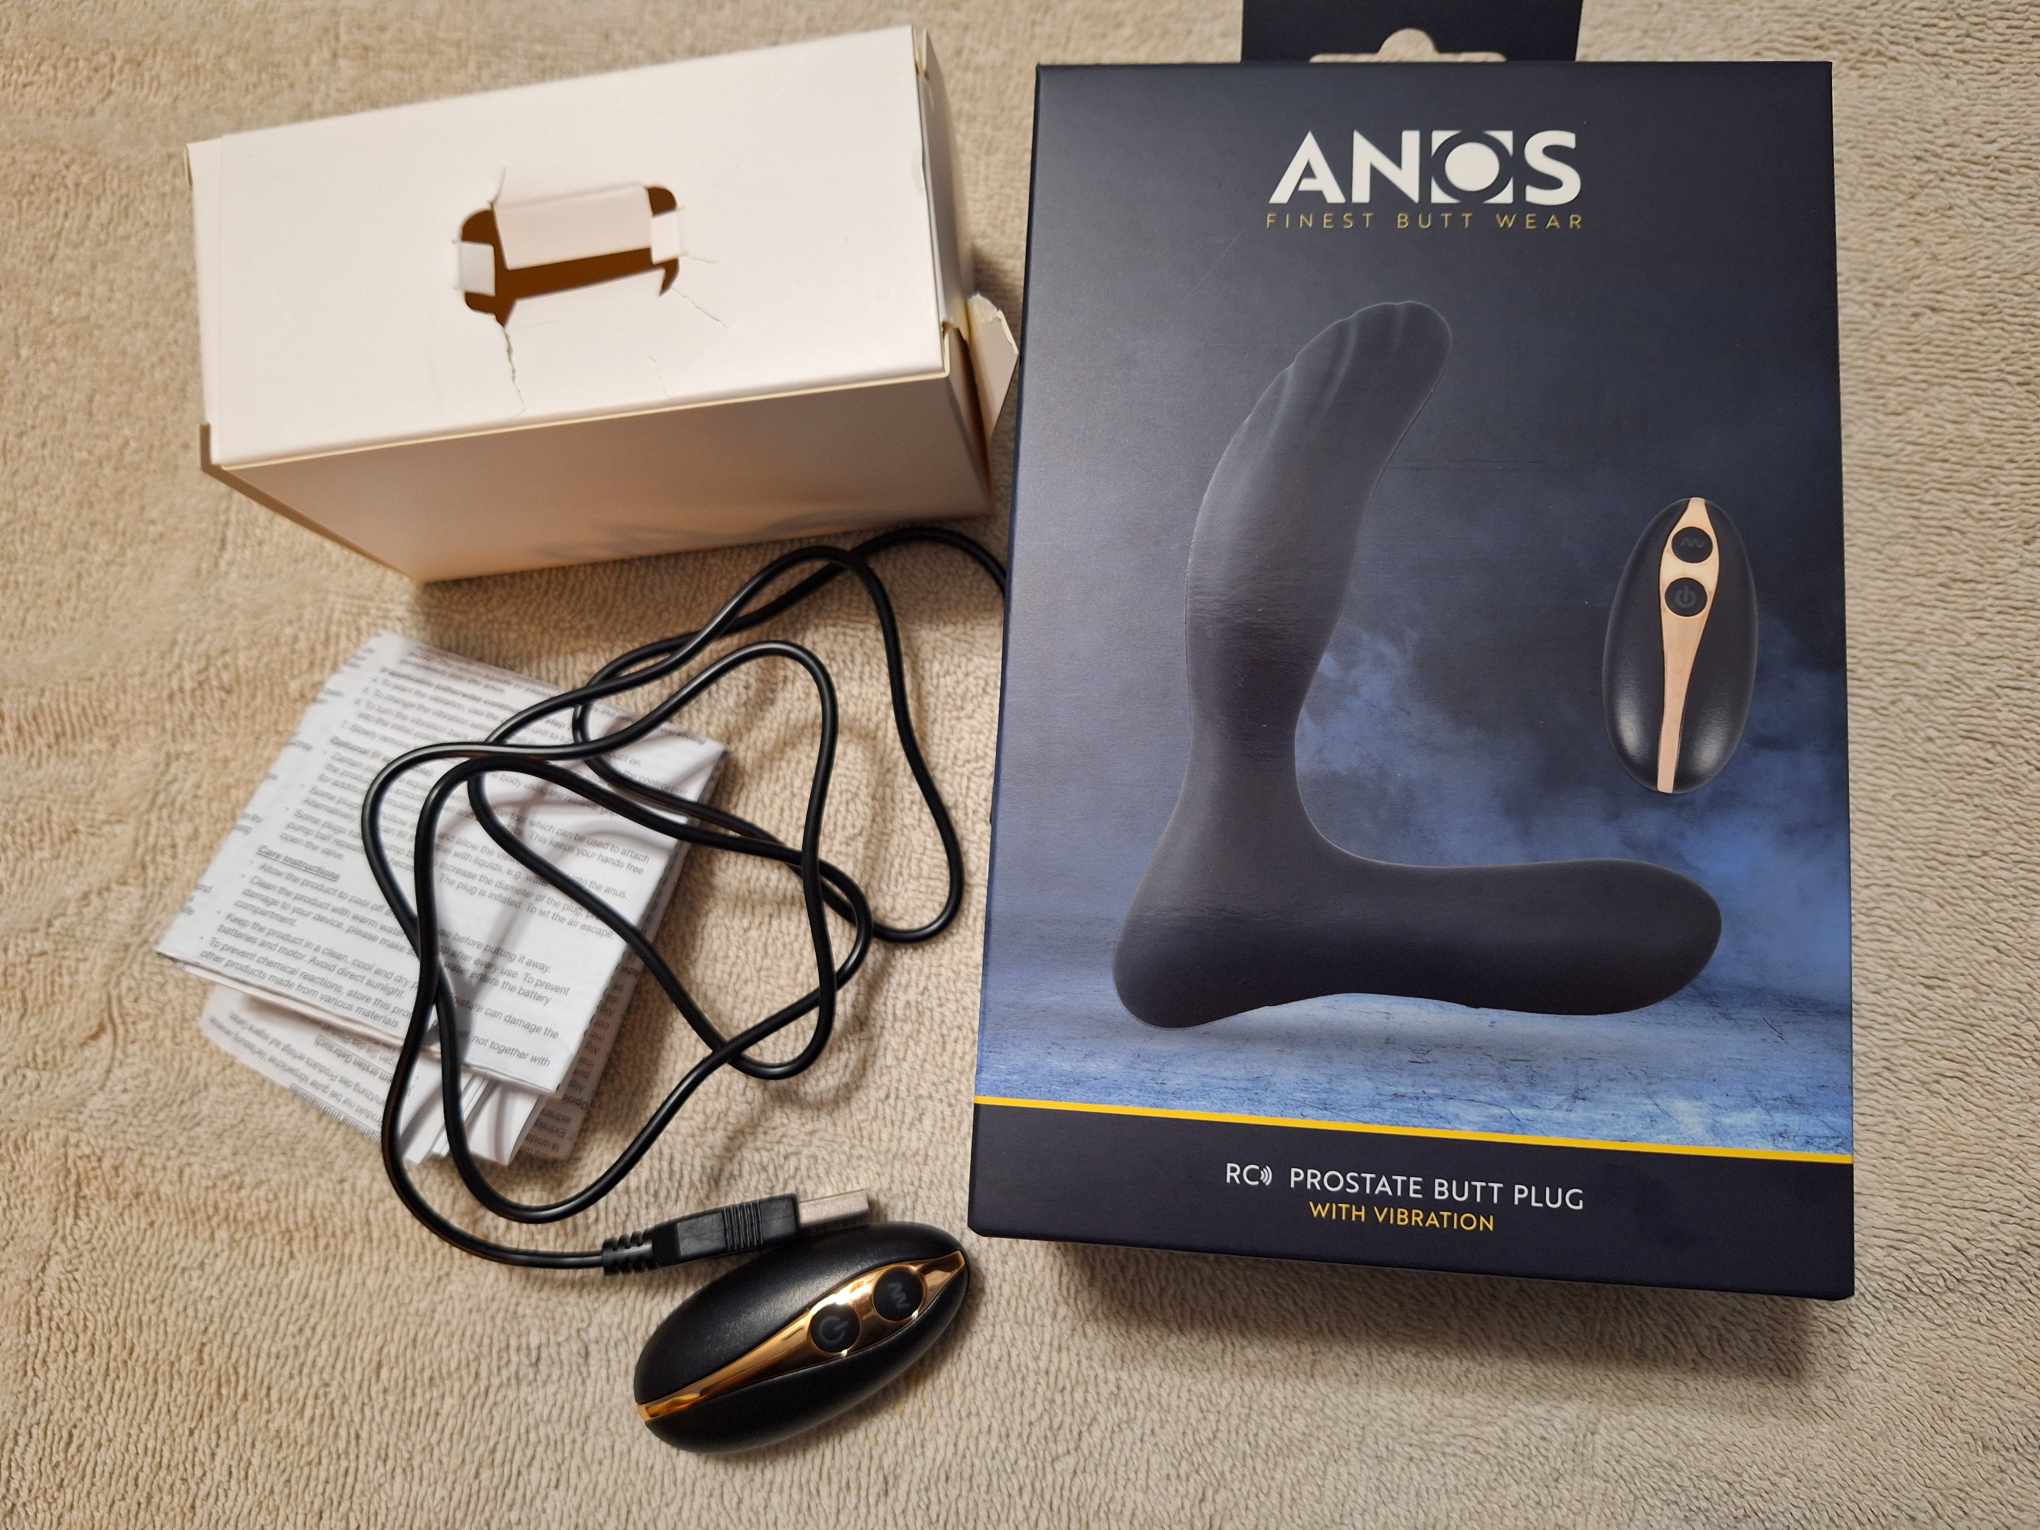 Anos RC Prostate Butt Plug The Anos RC Prostate Butt Plug: Balancing Quality and Cost